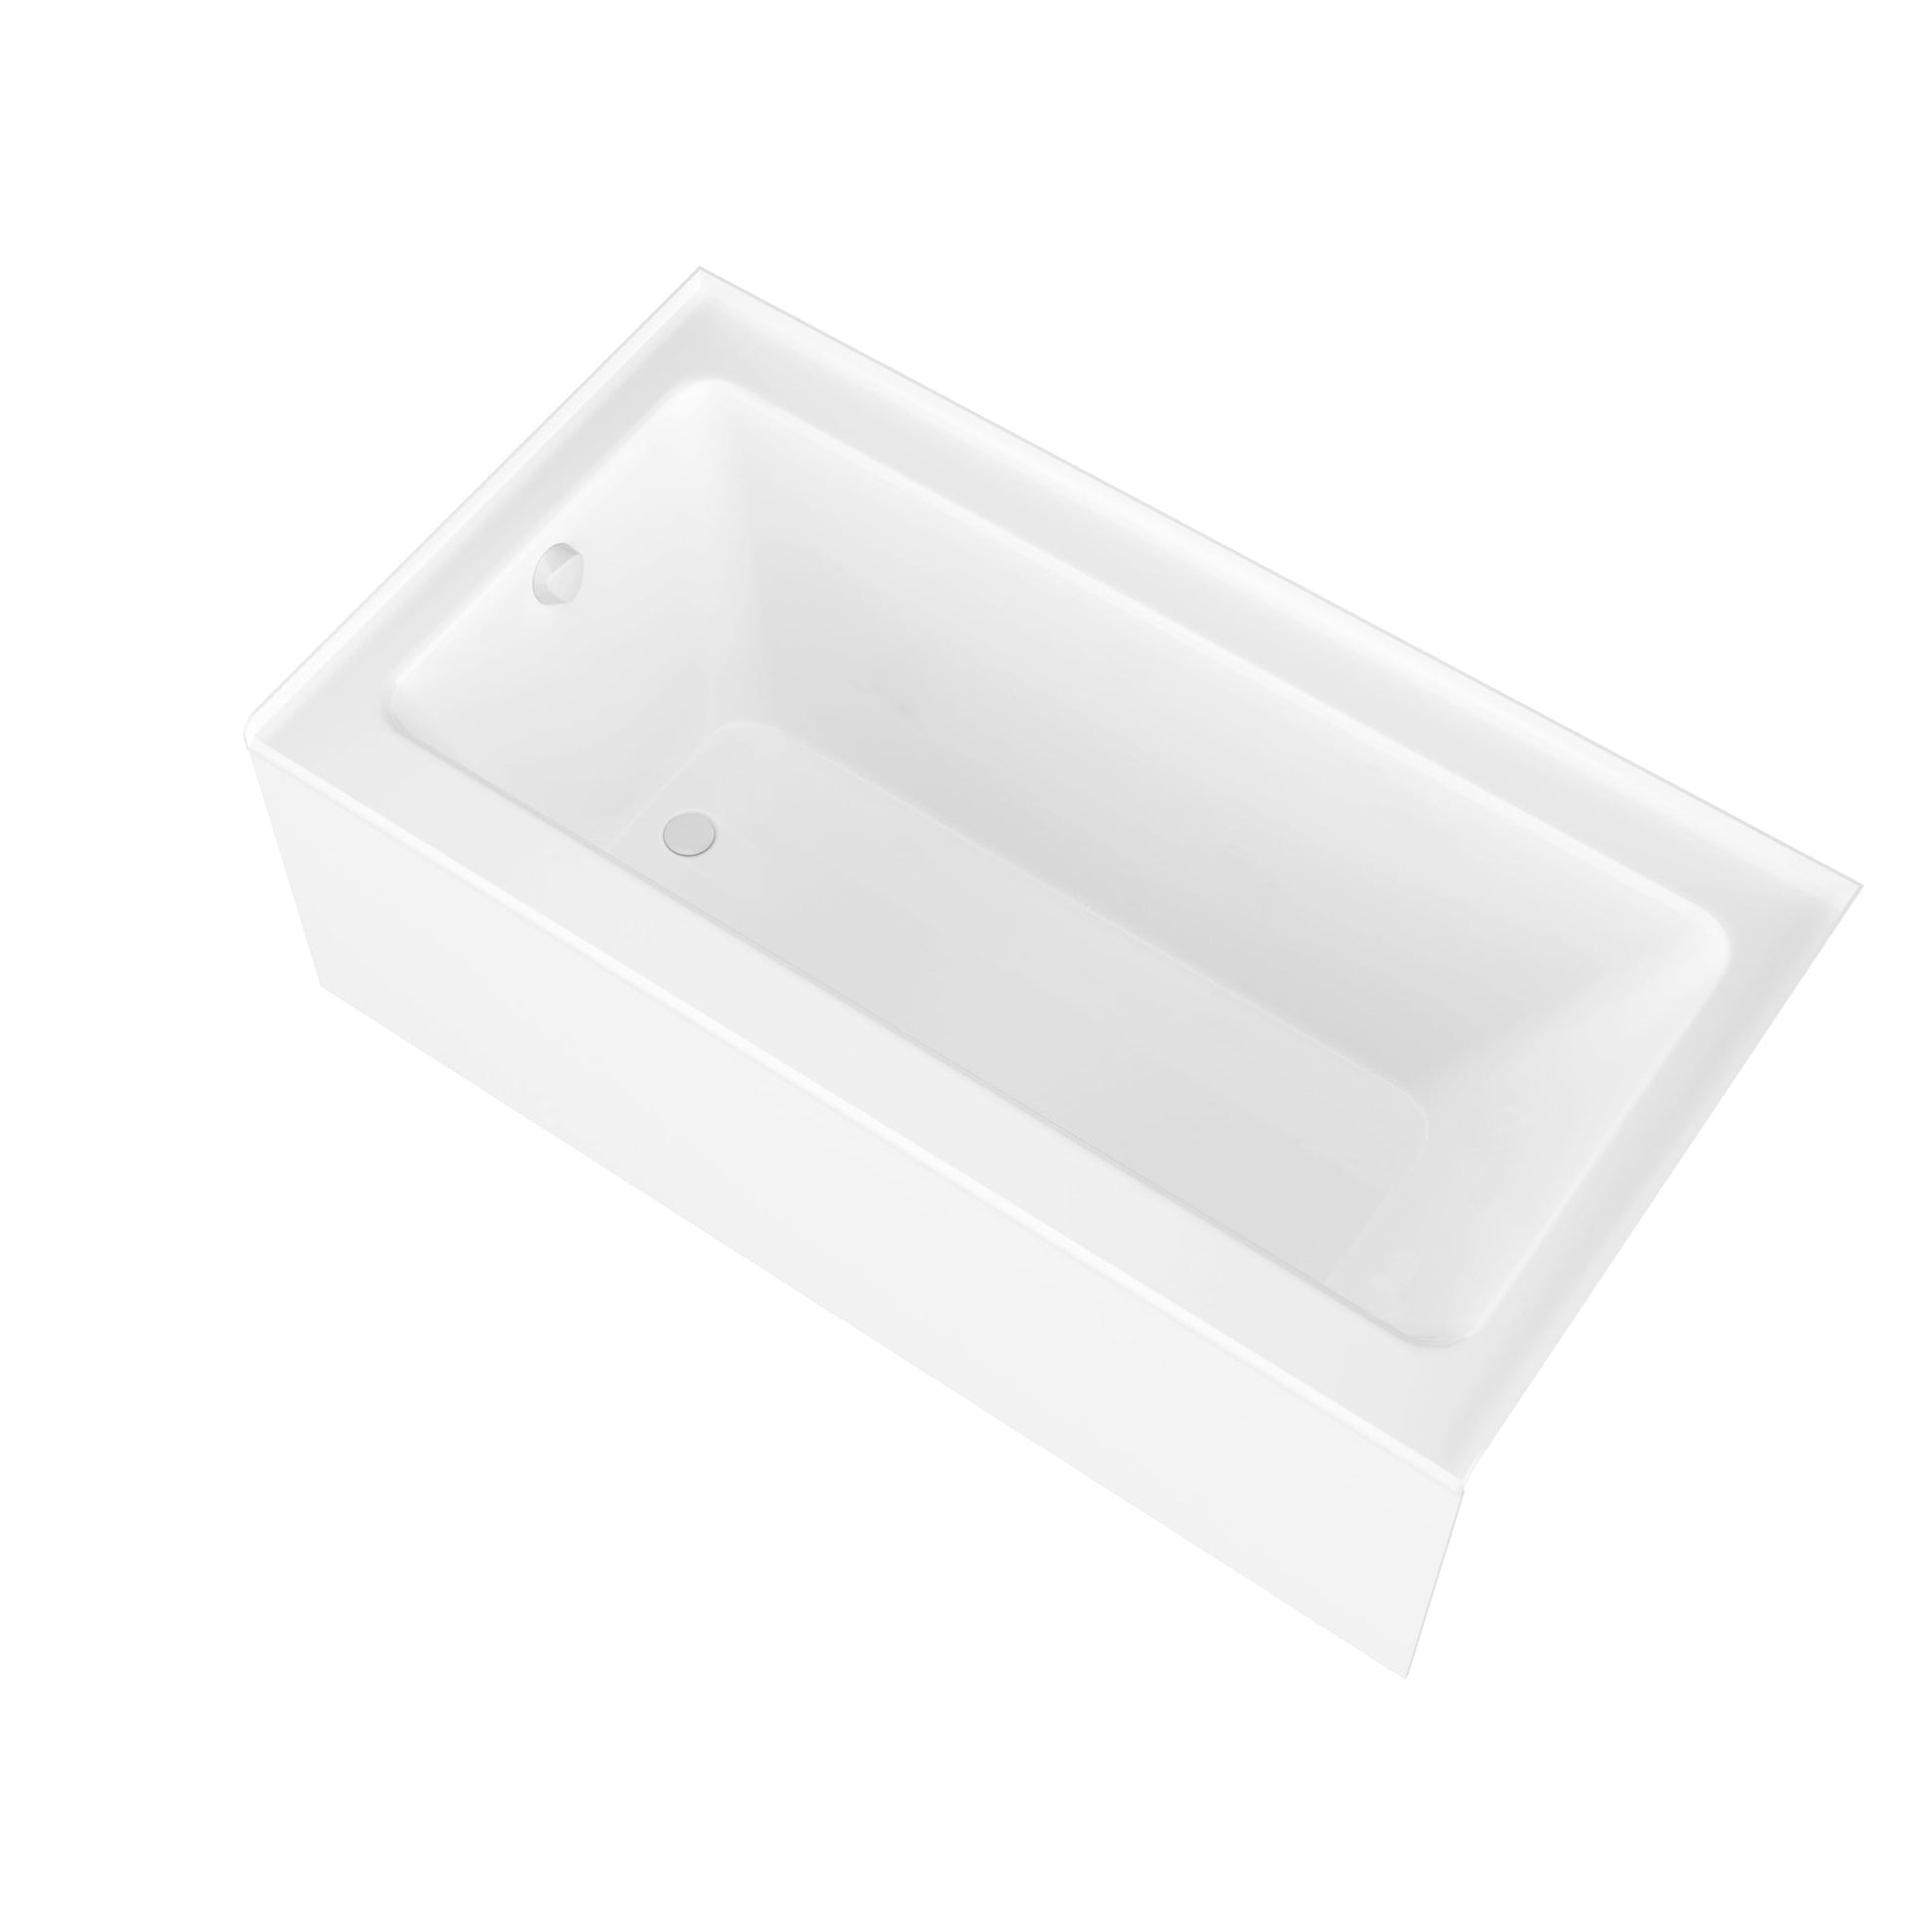 ANZZI Myth Series White "60 x 32" Alcove Left Drain Rectangular Bathtub With Built-In Flange and Frameless Polished Chrome Hinged Door